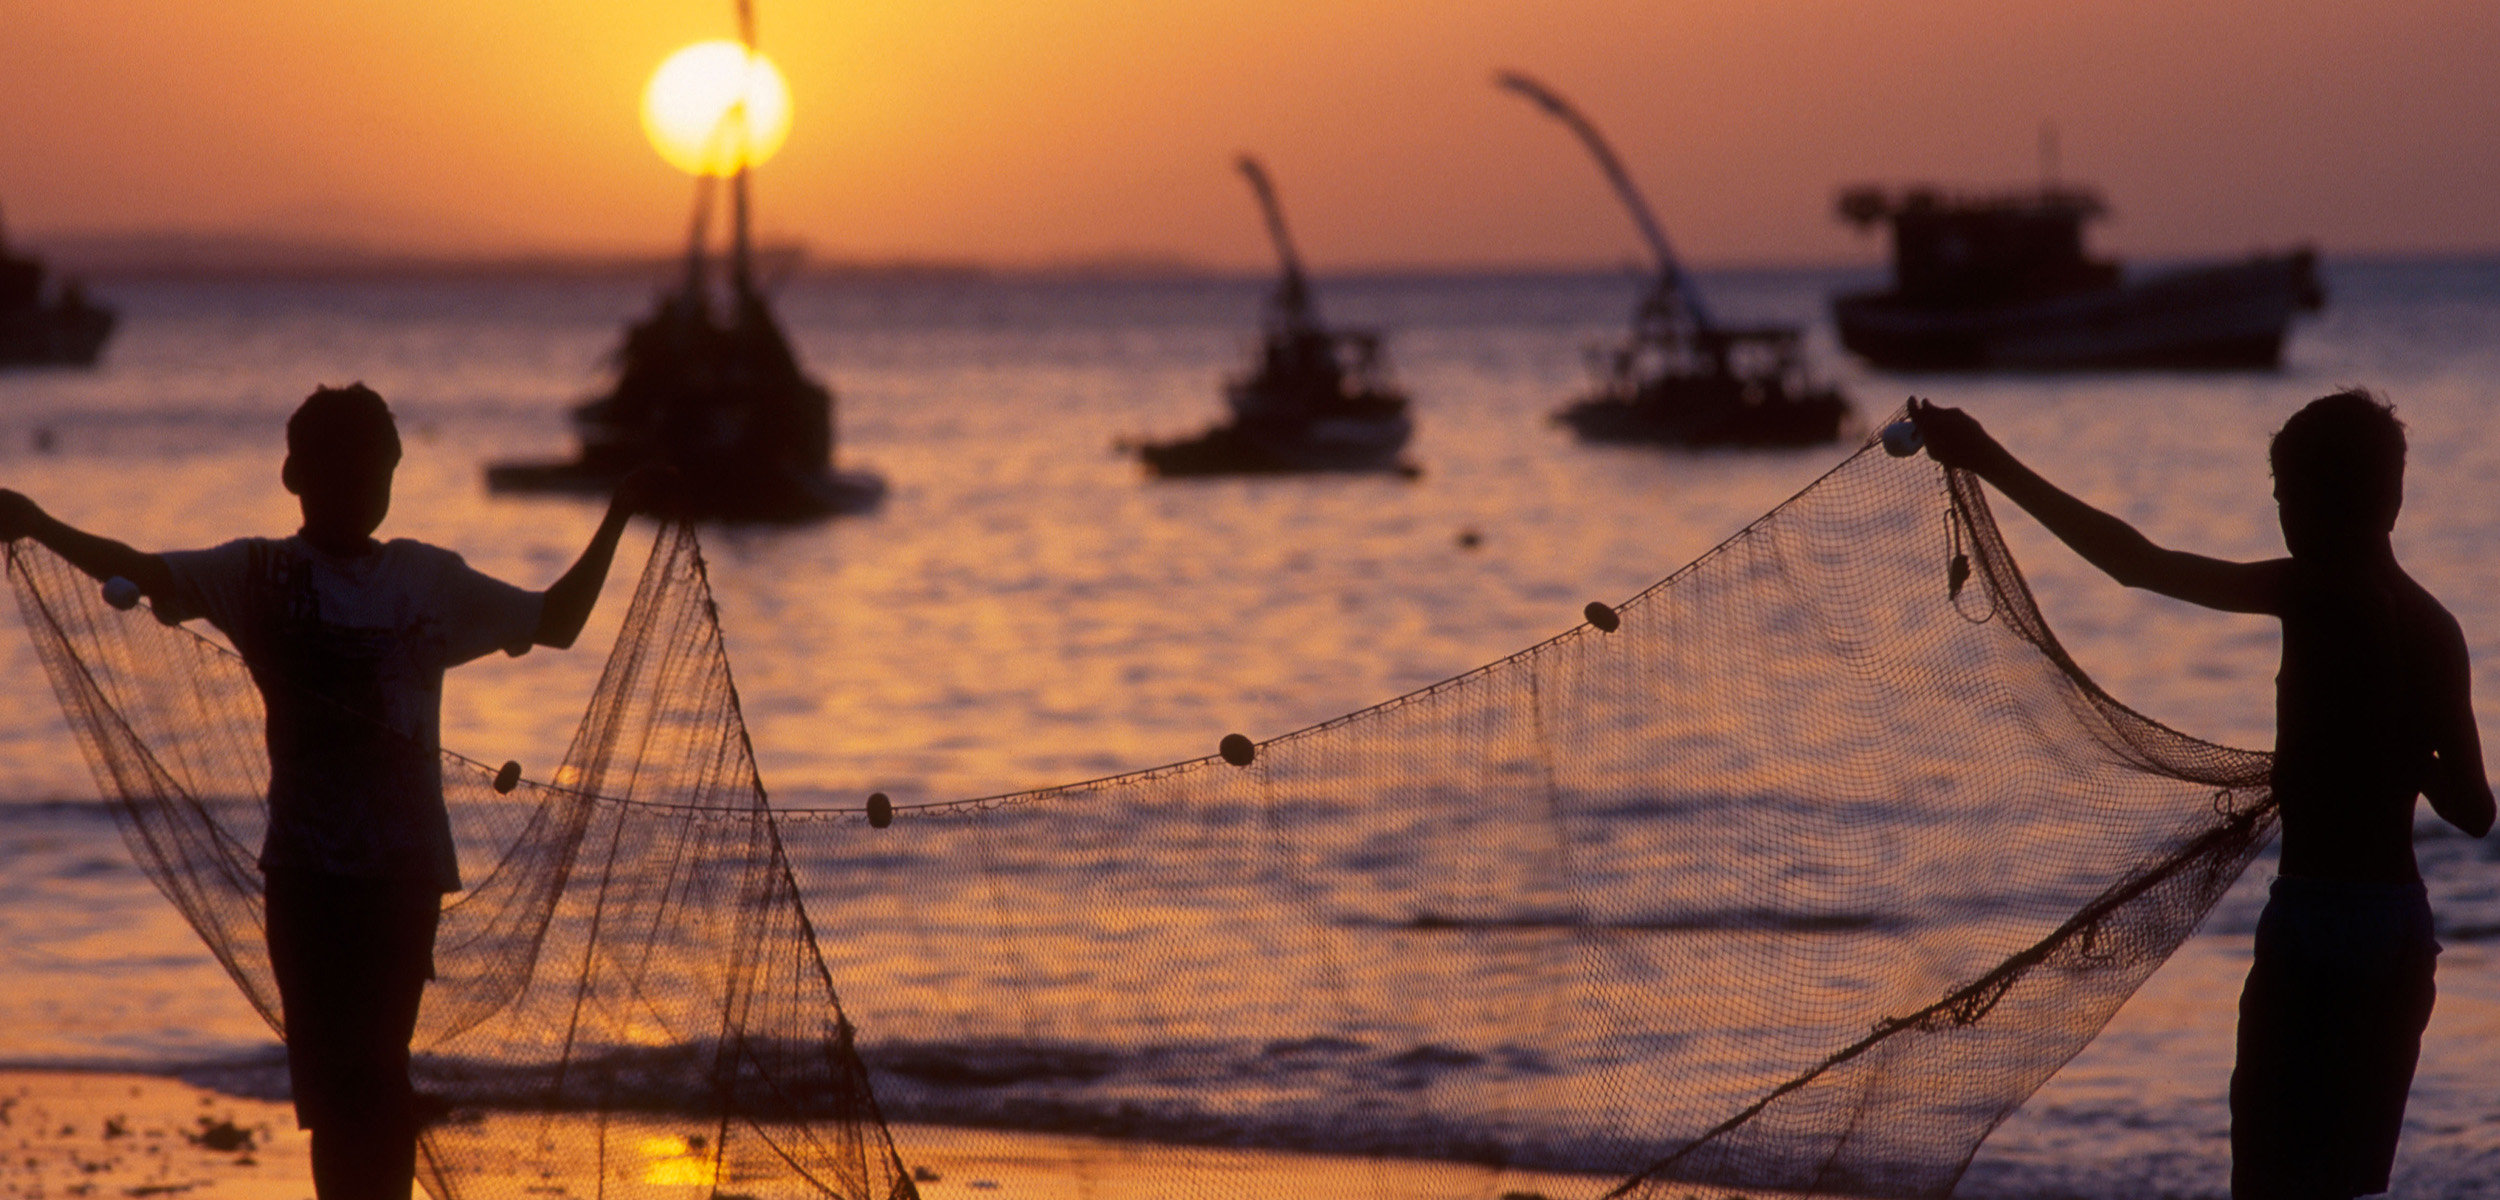 the silhouette of two children holding a fishing net over a sunset with fishing boats in the background